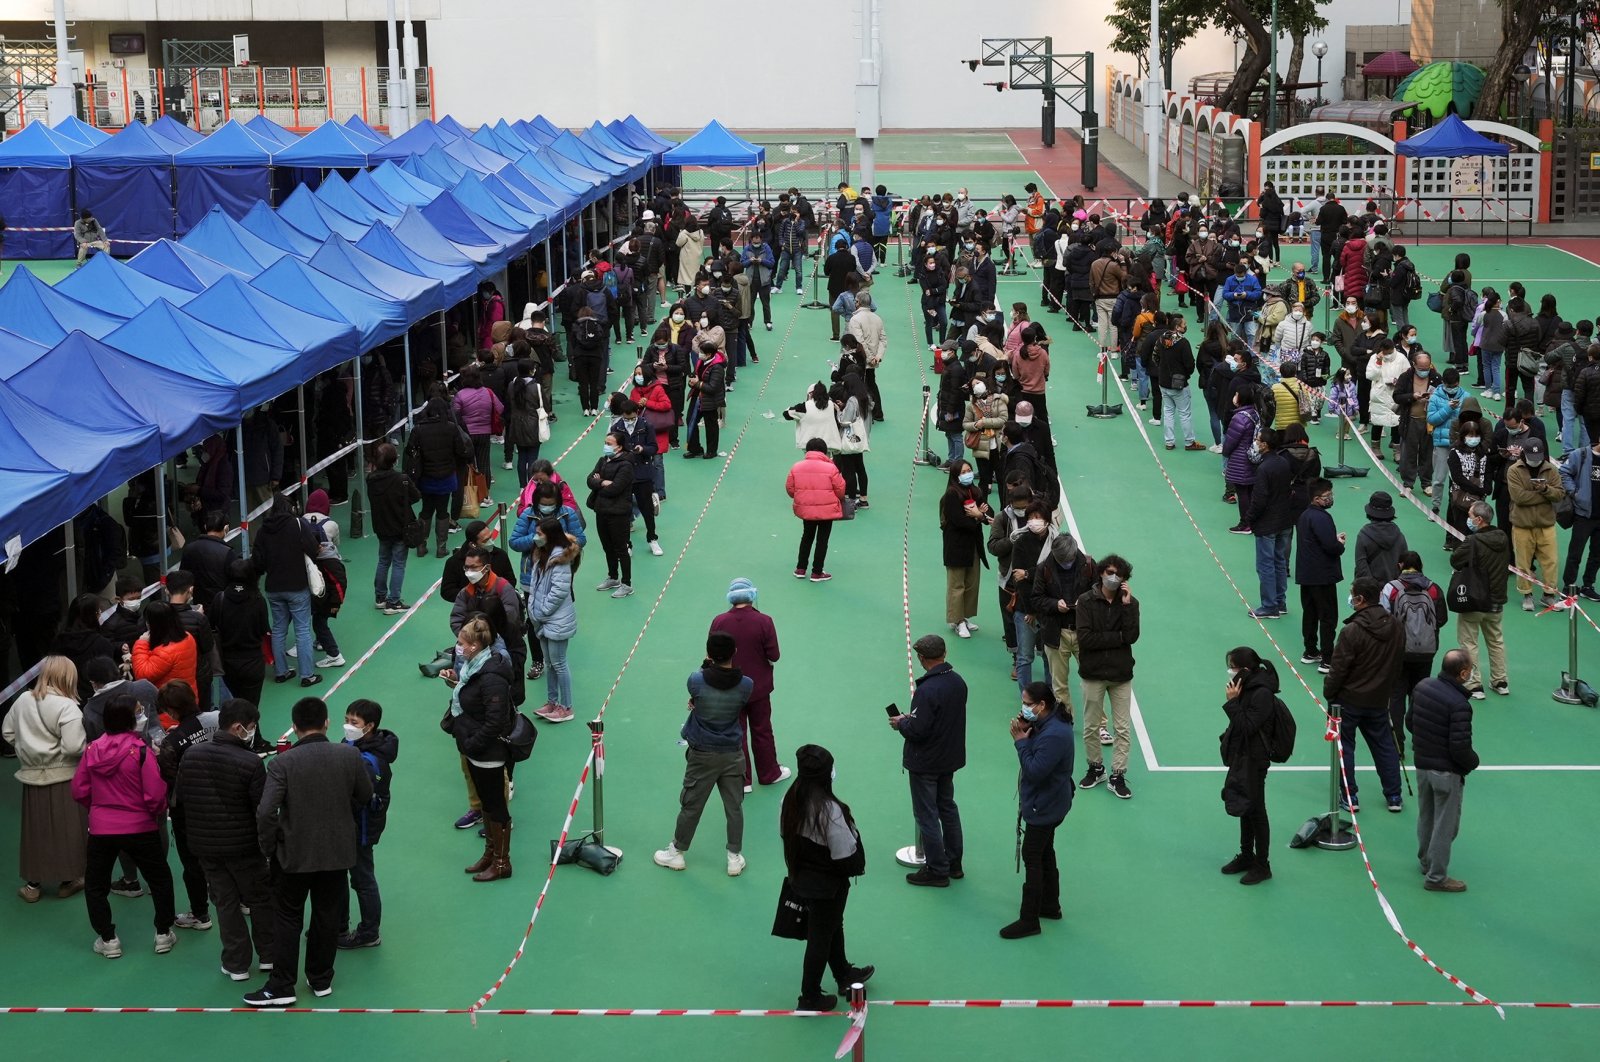 People wearing face masks line up at a testing center for COVID-19 in Hong Kong, China, Feb. 23, 2022. (Reuters Photo)